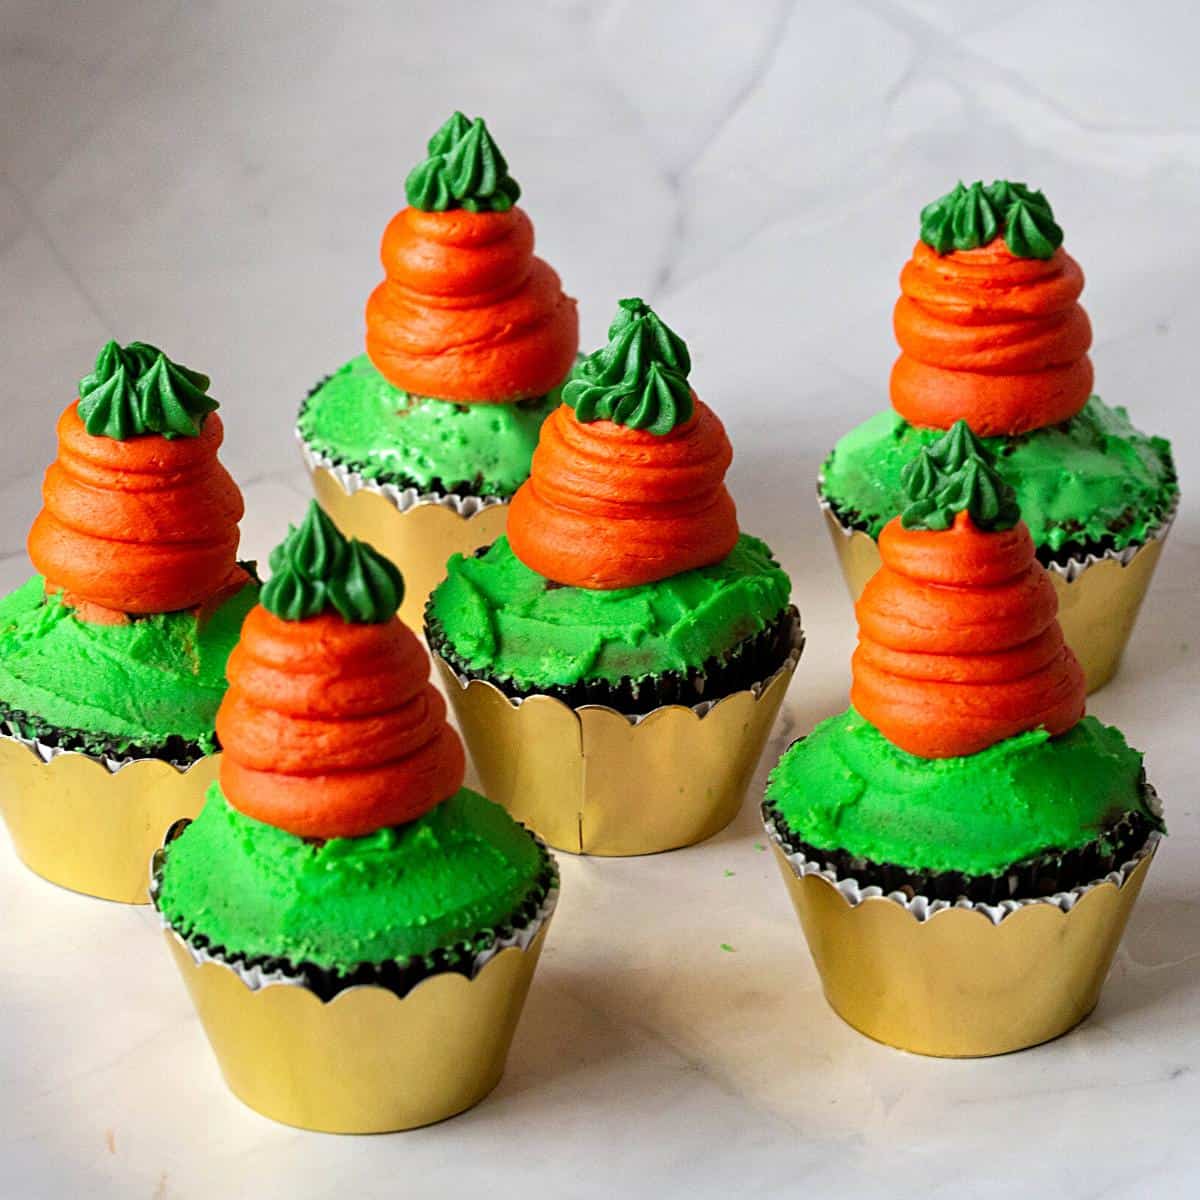 Cupcakes with frosting carrots.